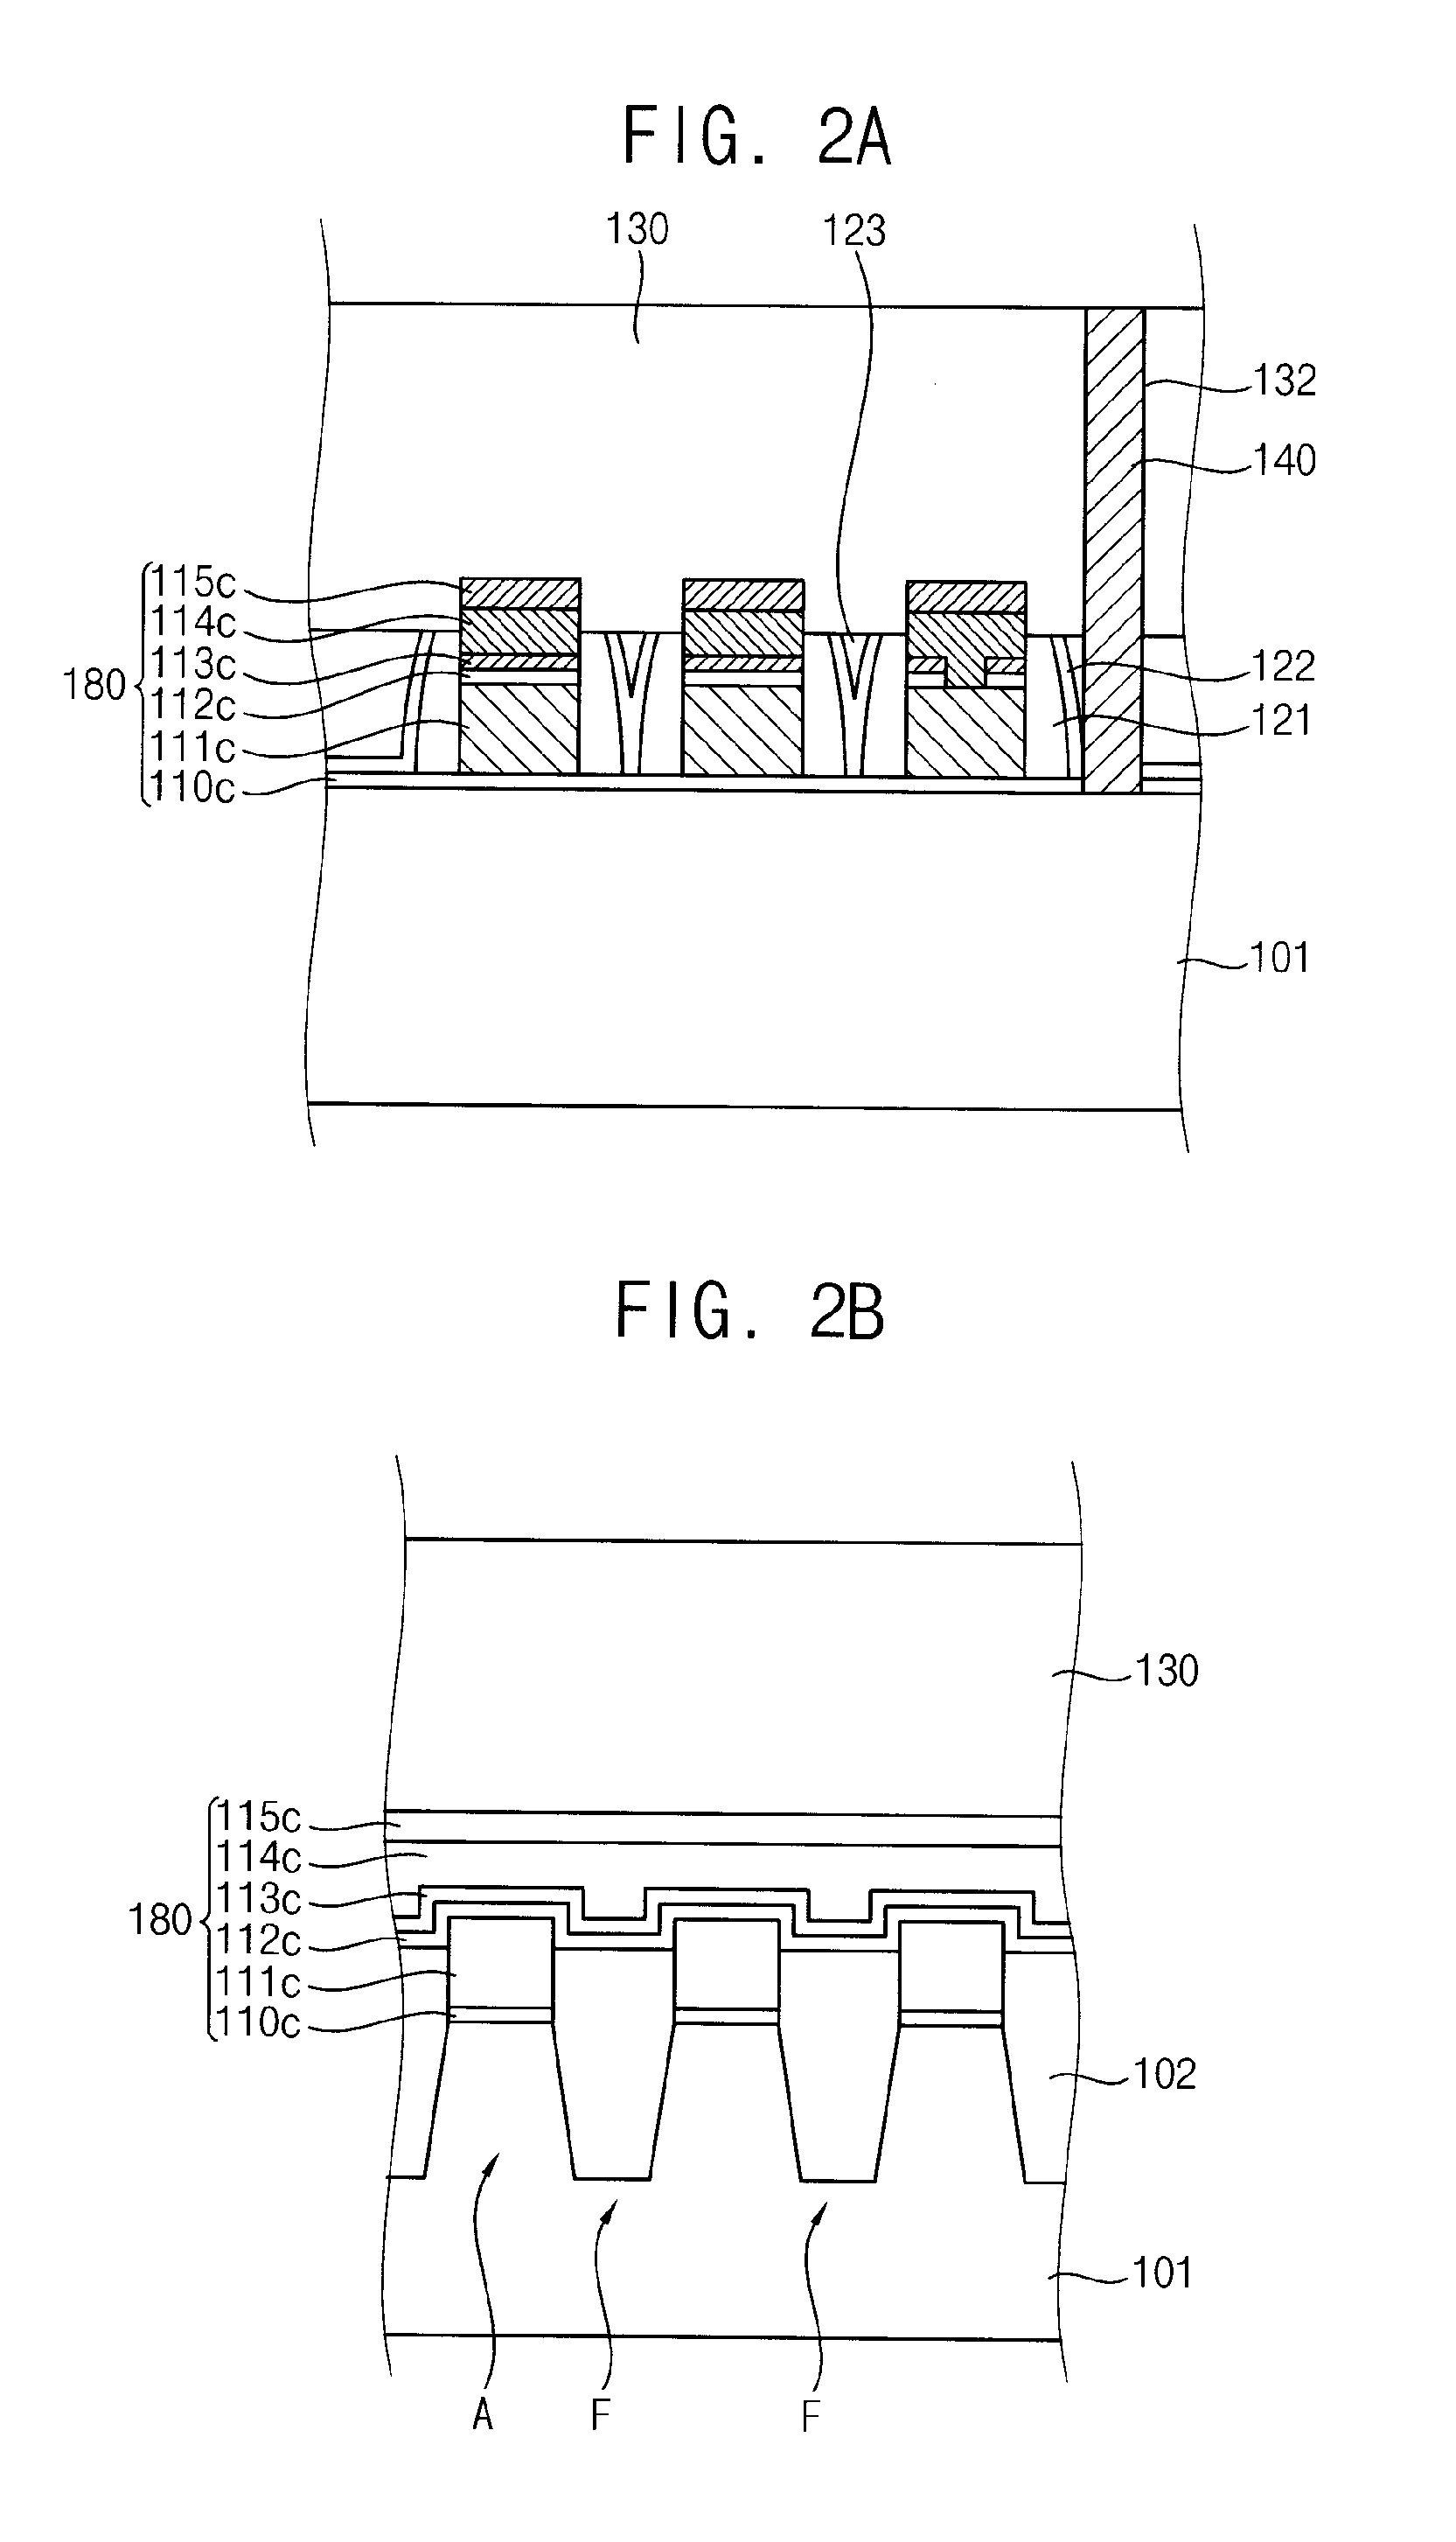 Method of manufacturing an integrated circuit device